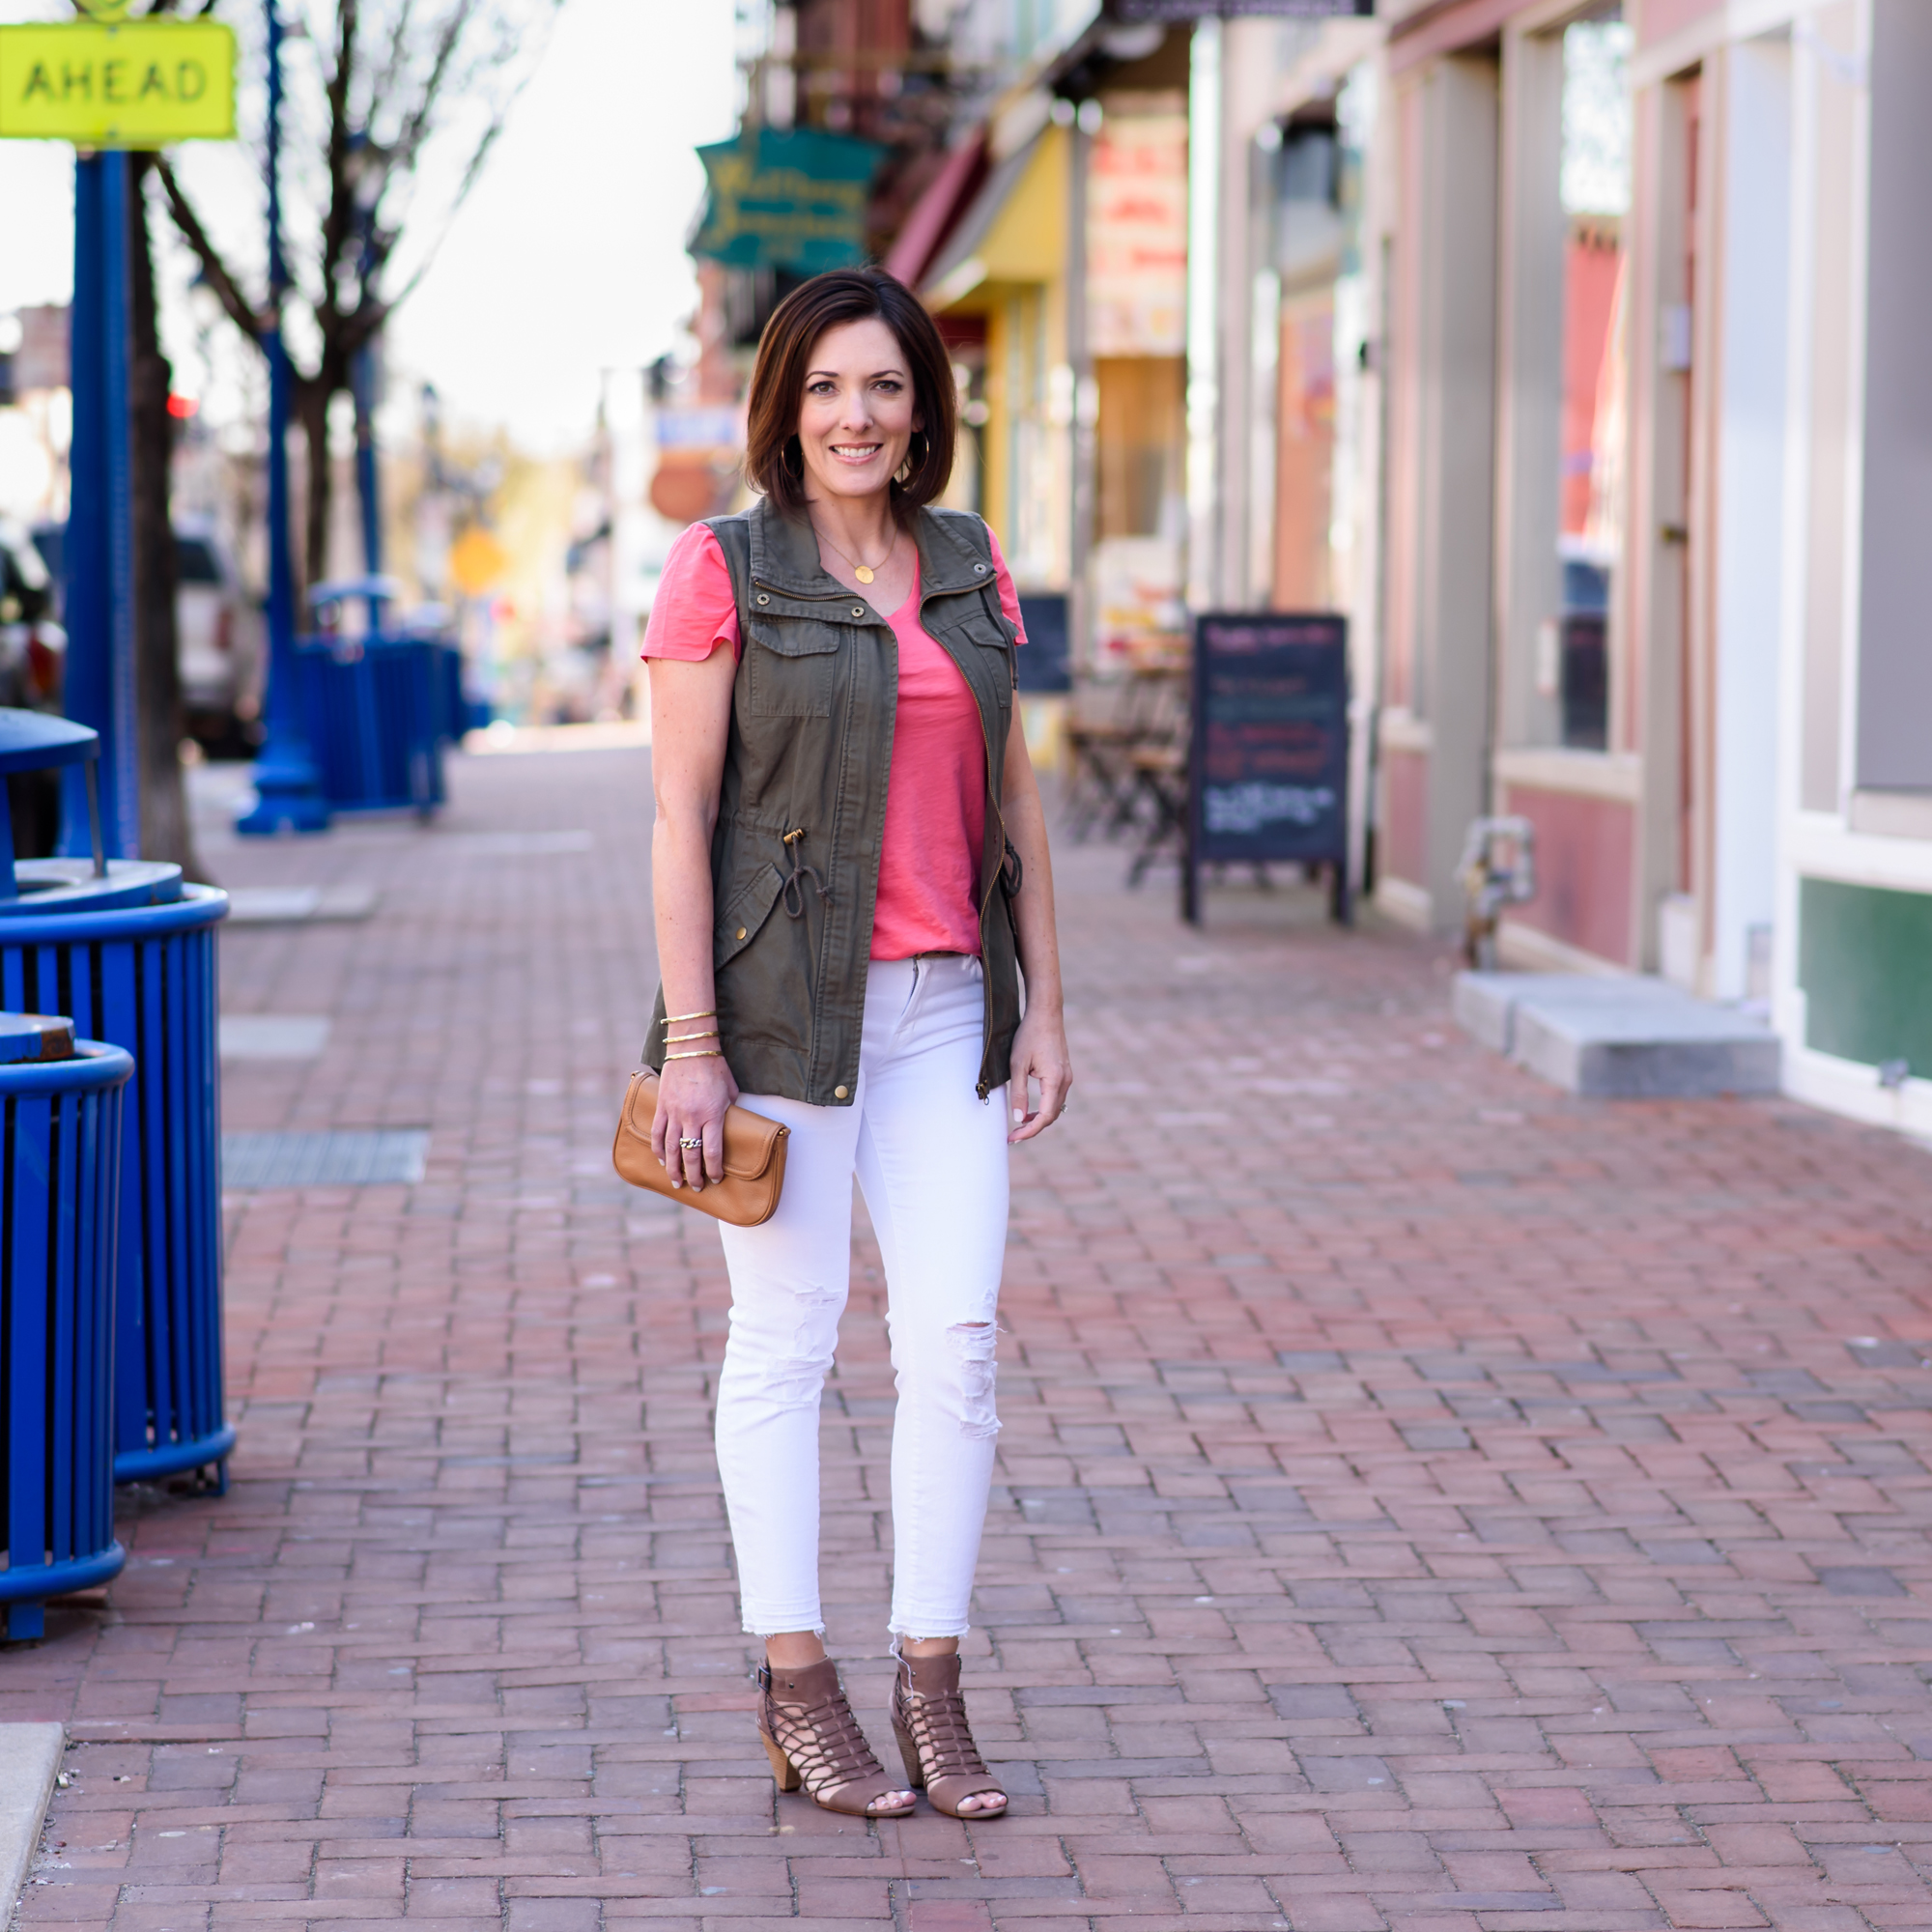 How to Wear a Utility Vest for Spring